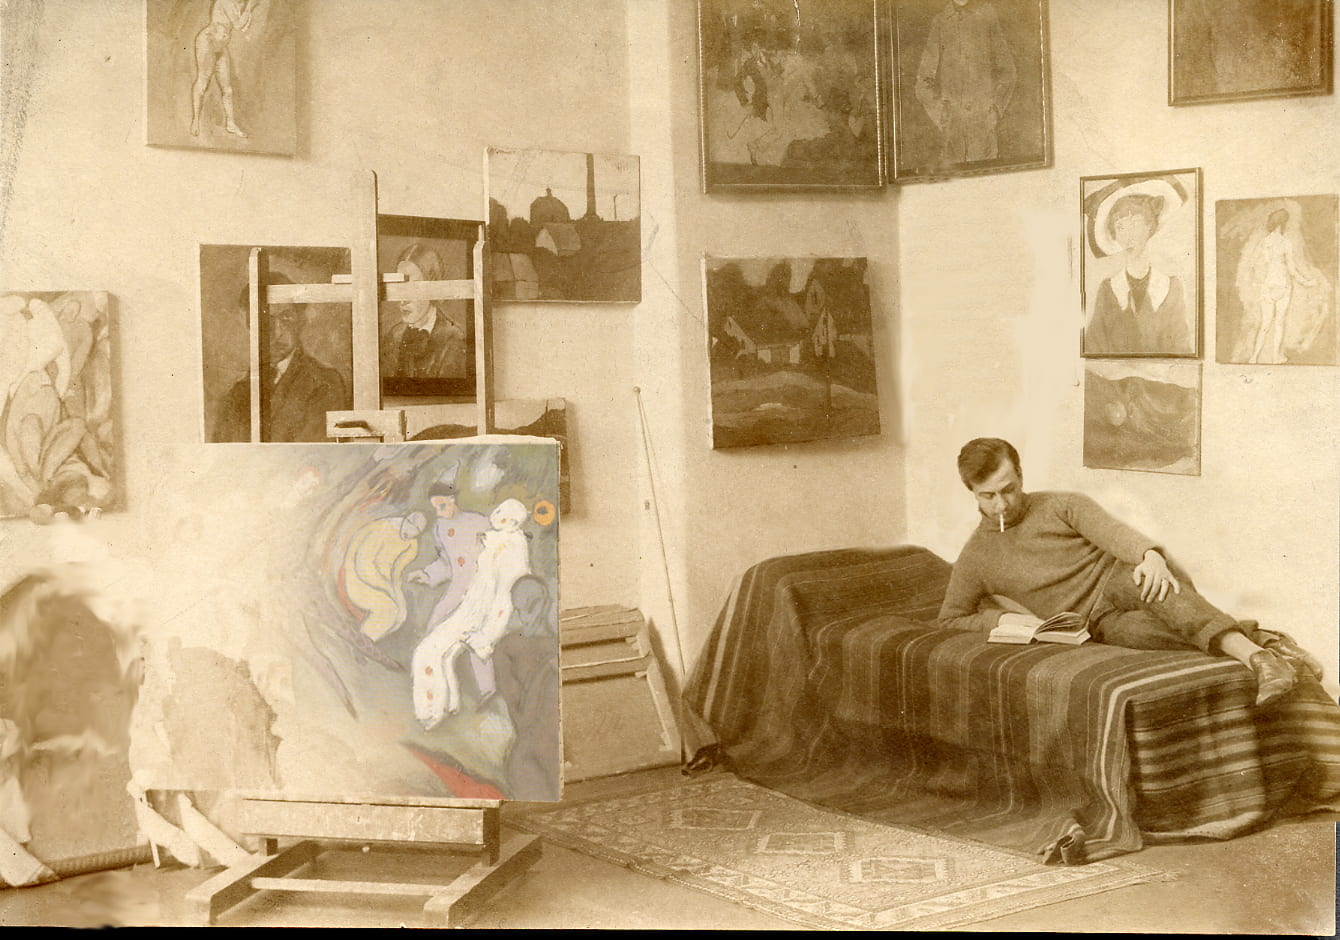 A sepia-toned image of a man smoking and reading on his bed in a room surrounded by paintings